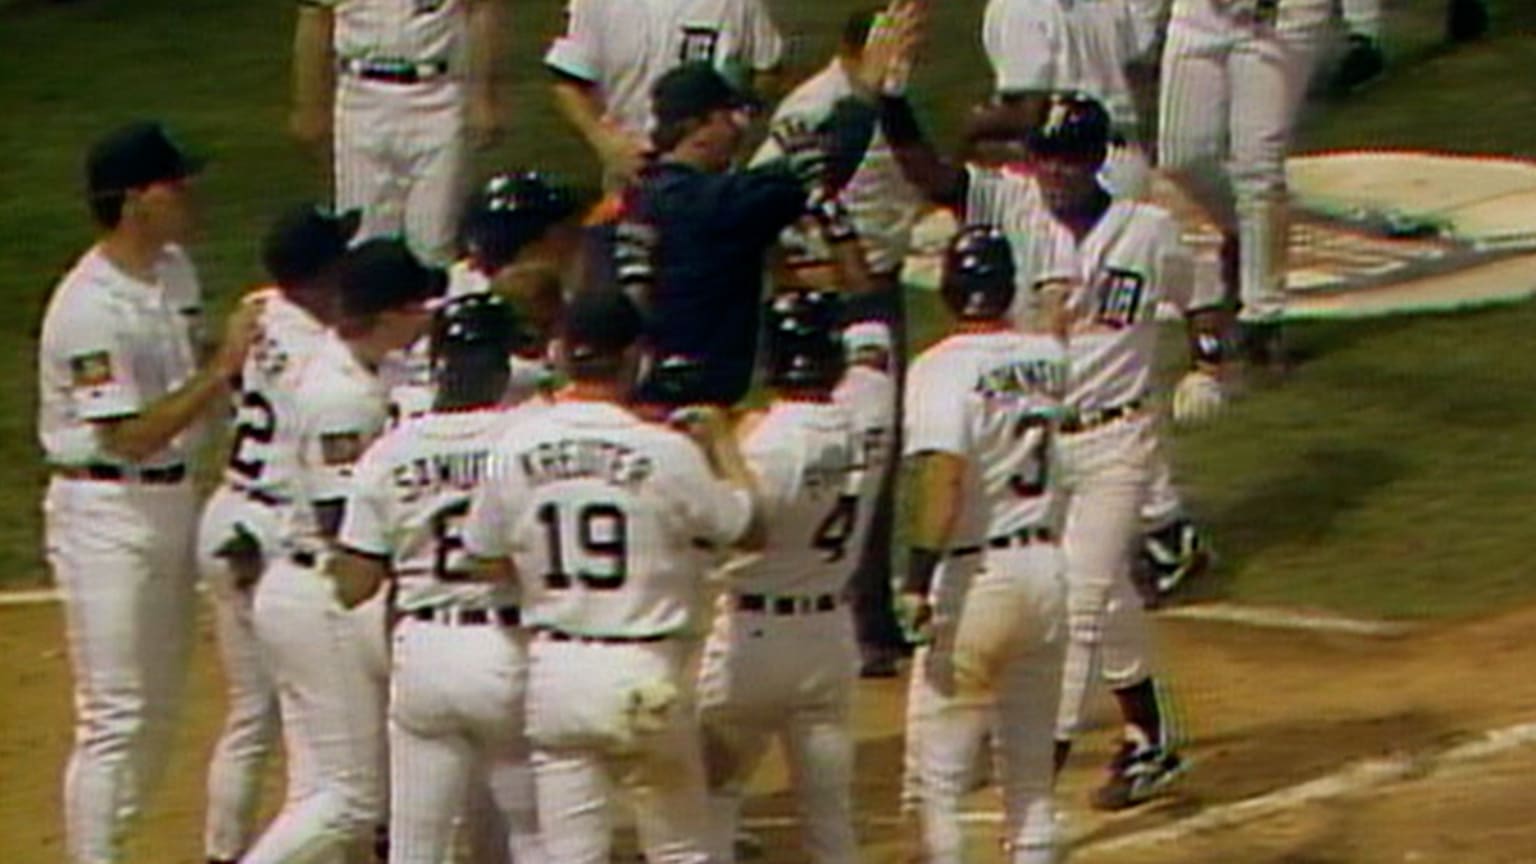 Echo of a roar: Lou Whitaker visits hallowed ground before 1984 Detroit  Tigers reunion 